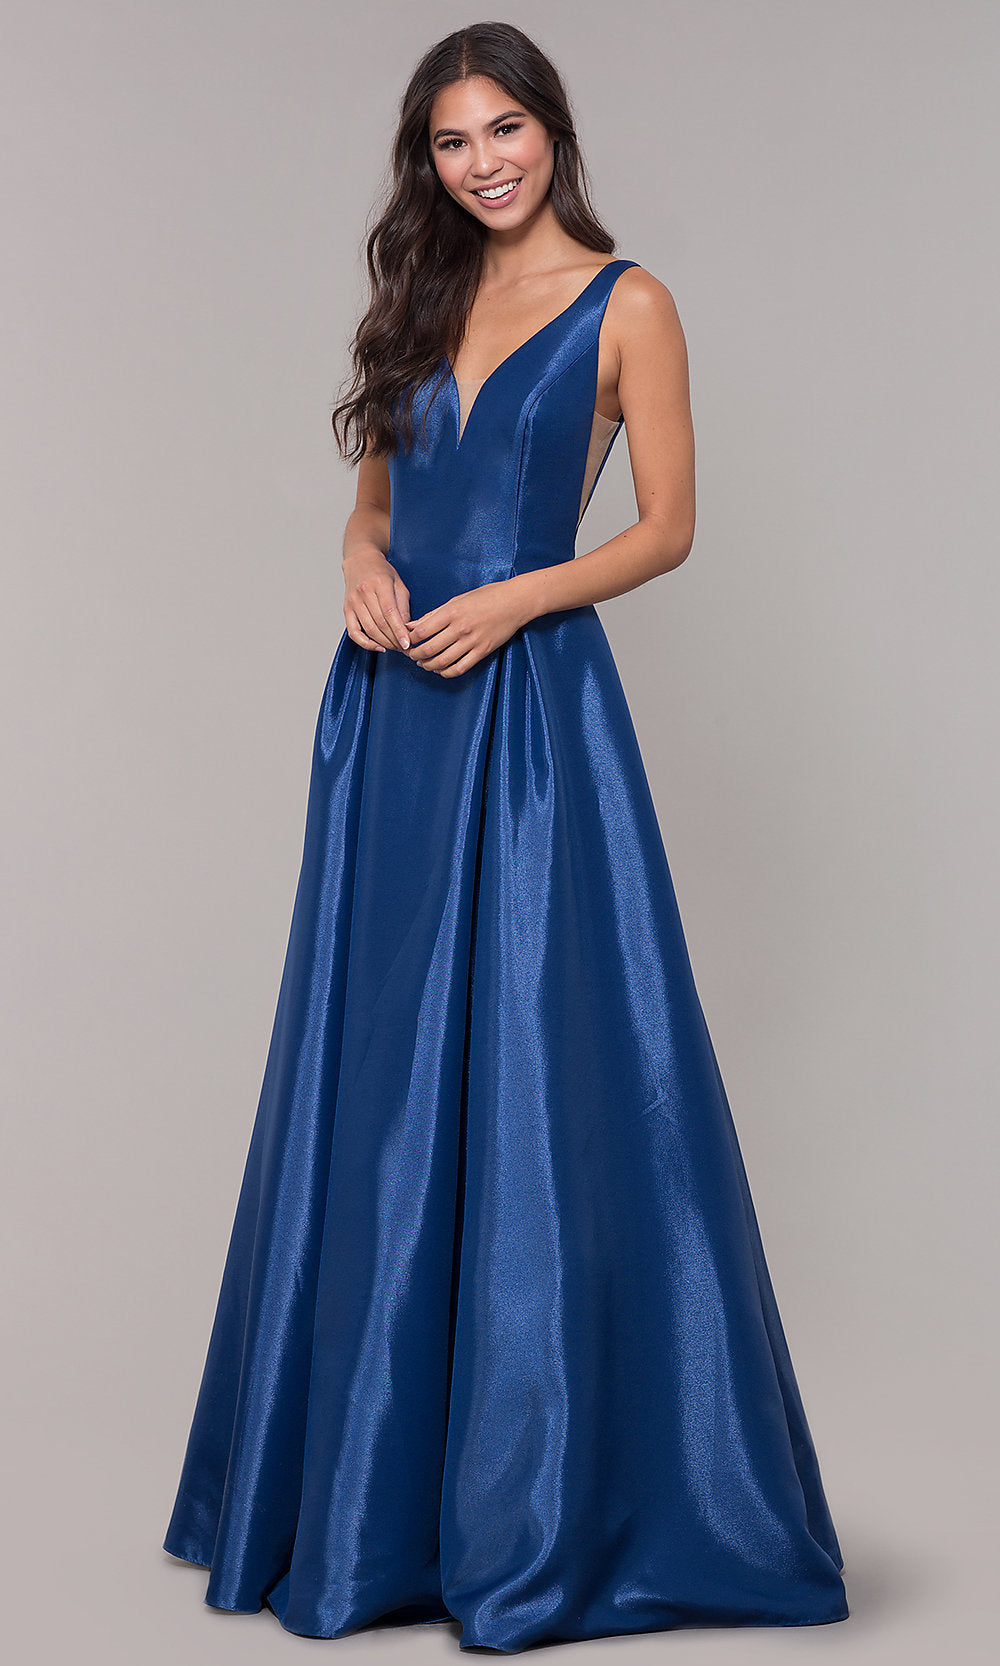 Satin Long A-Line Prom Dress with Pockets